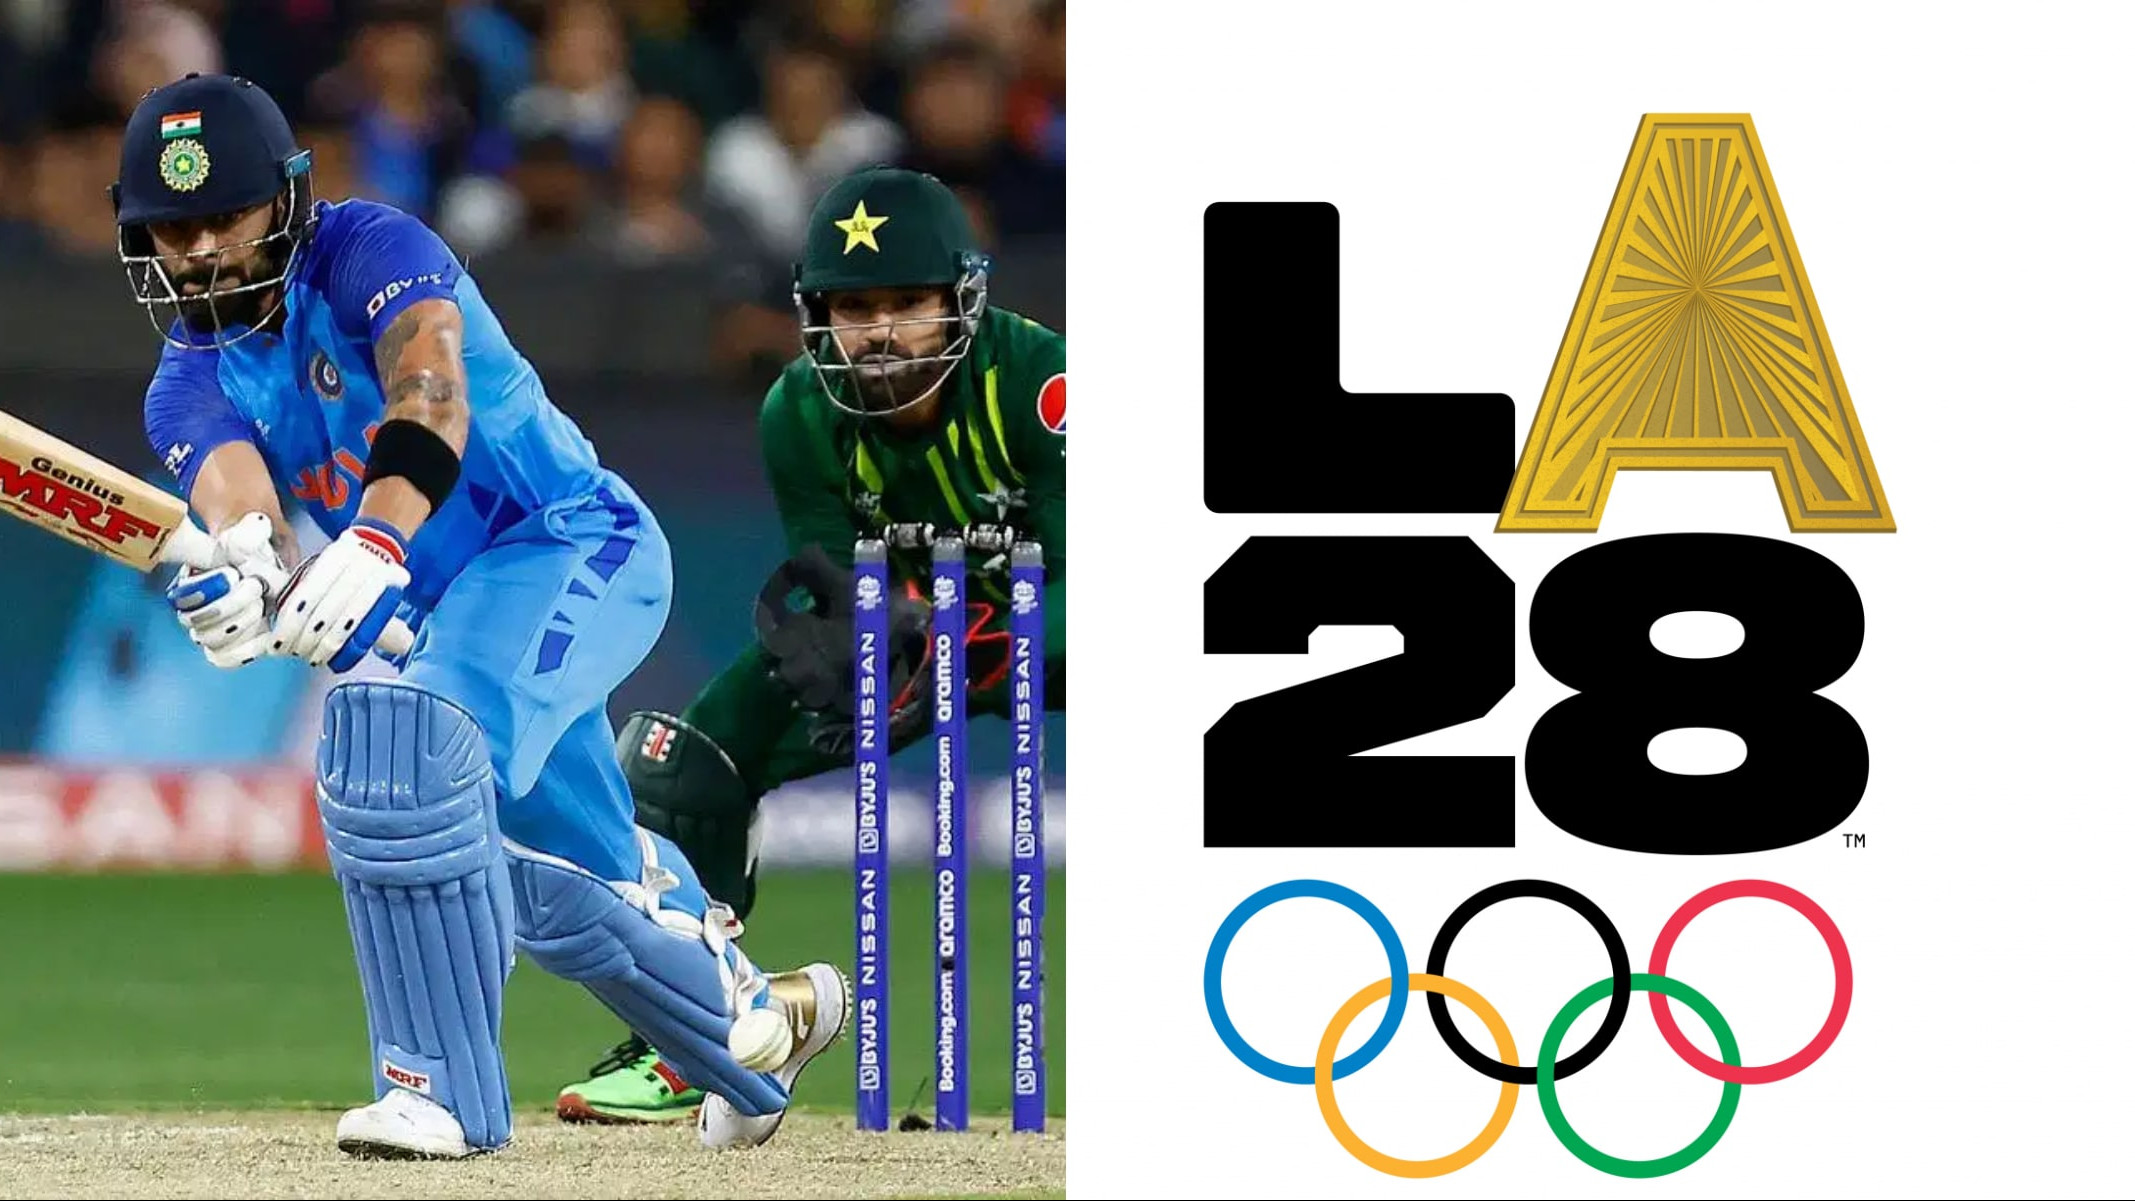 Cricket set to be included in Olympics 2028 to be held in Los Angeles